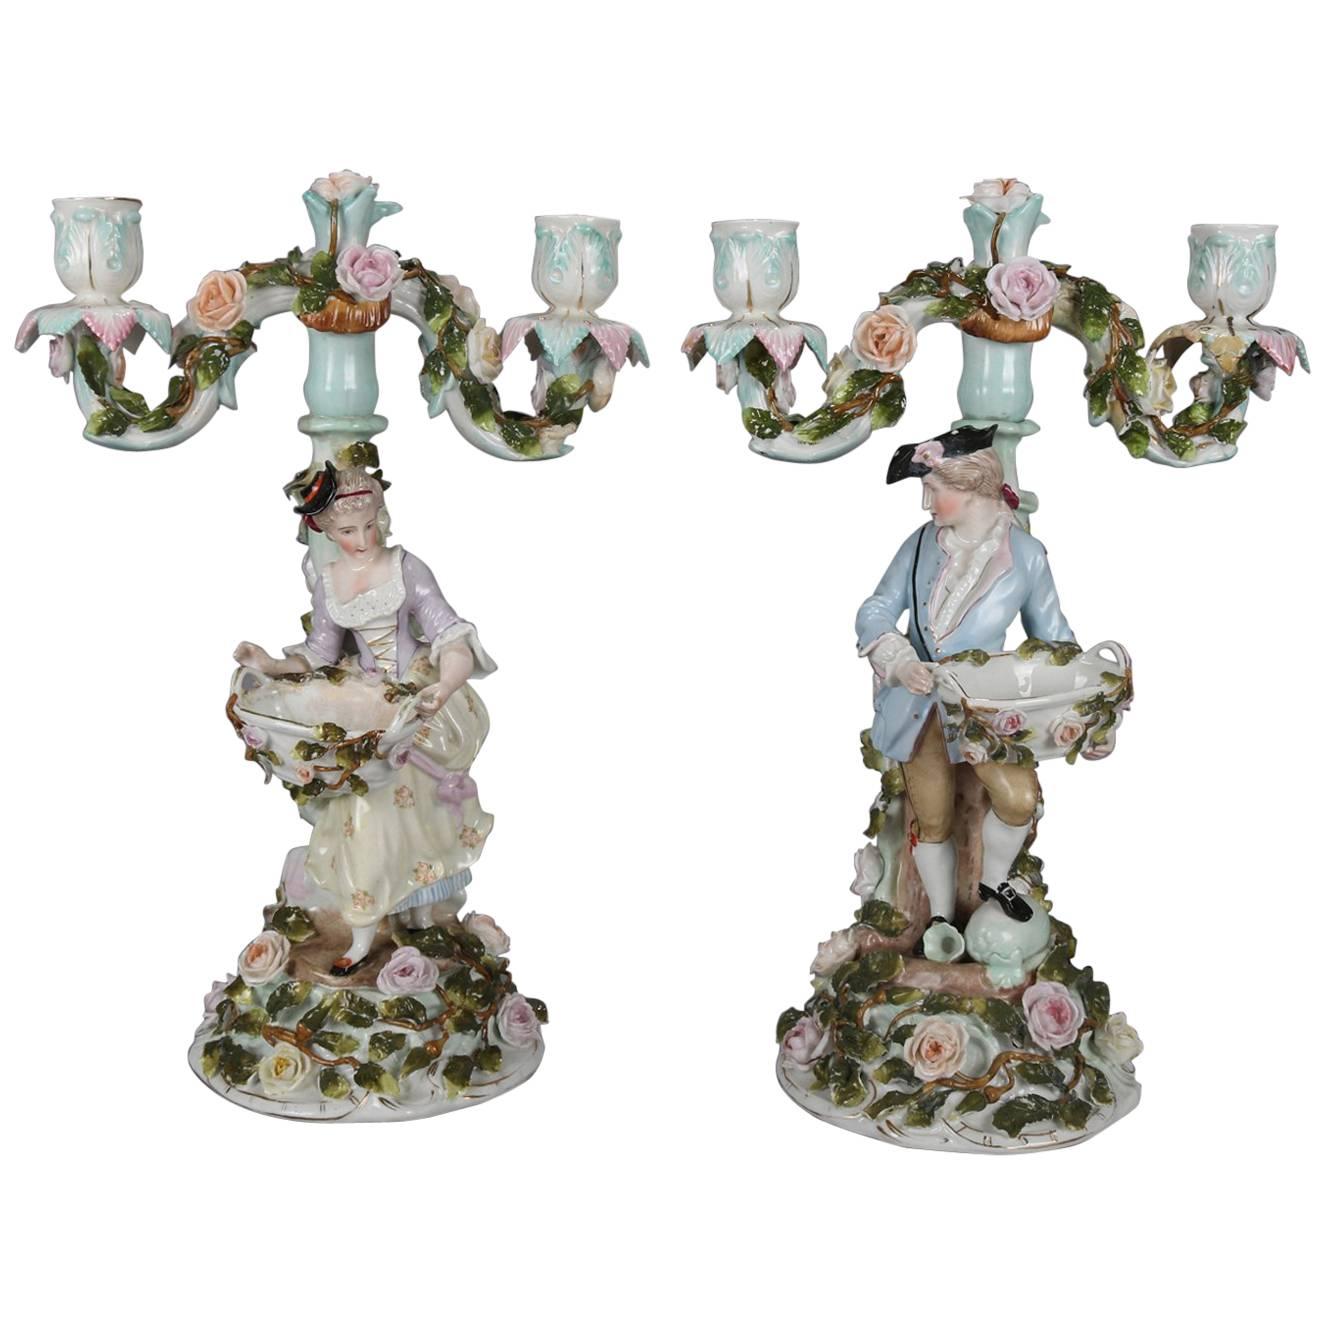 Pair of German Dresden Figural Hand-Painted and Gilt Porcelain Candelabra